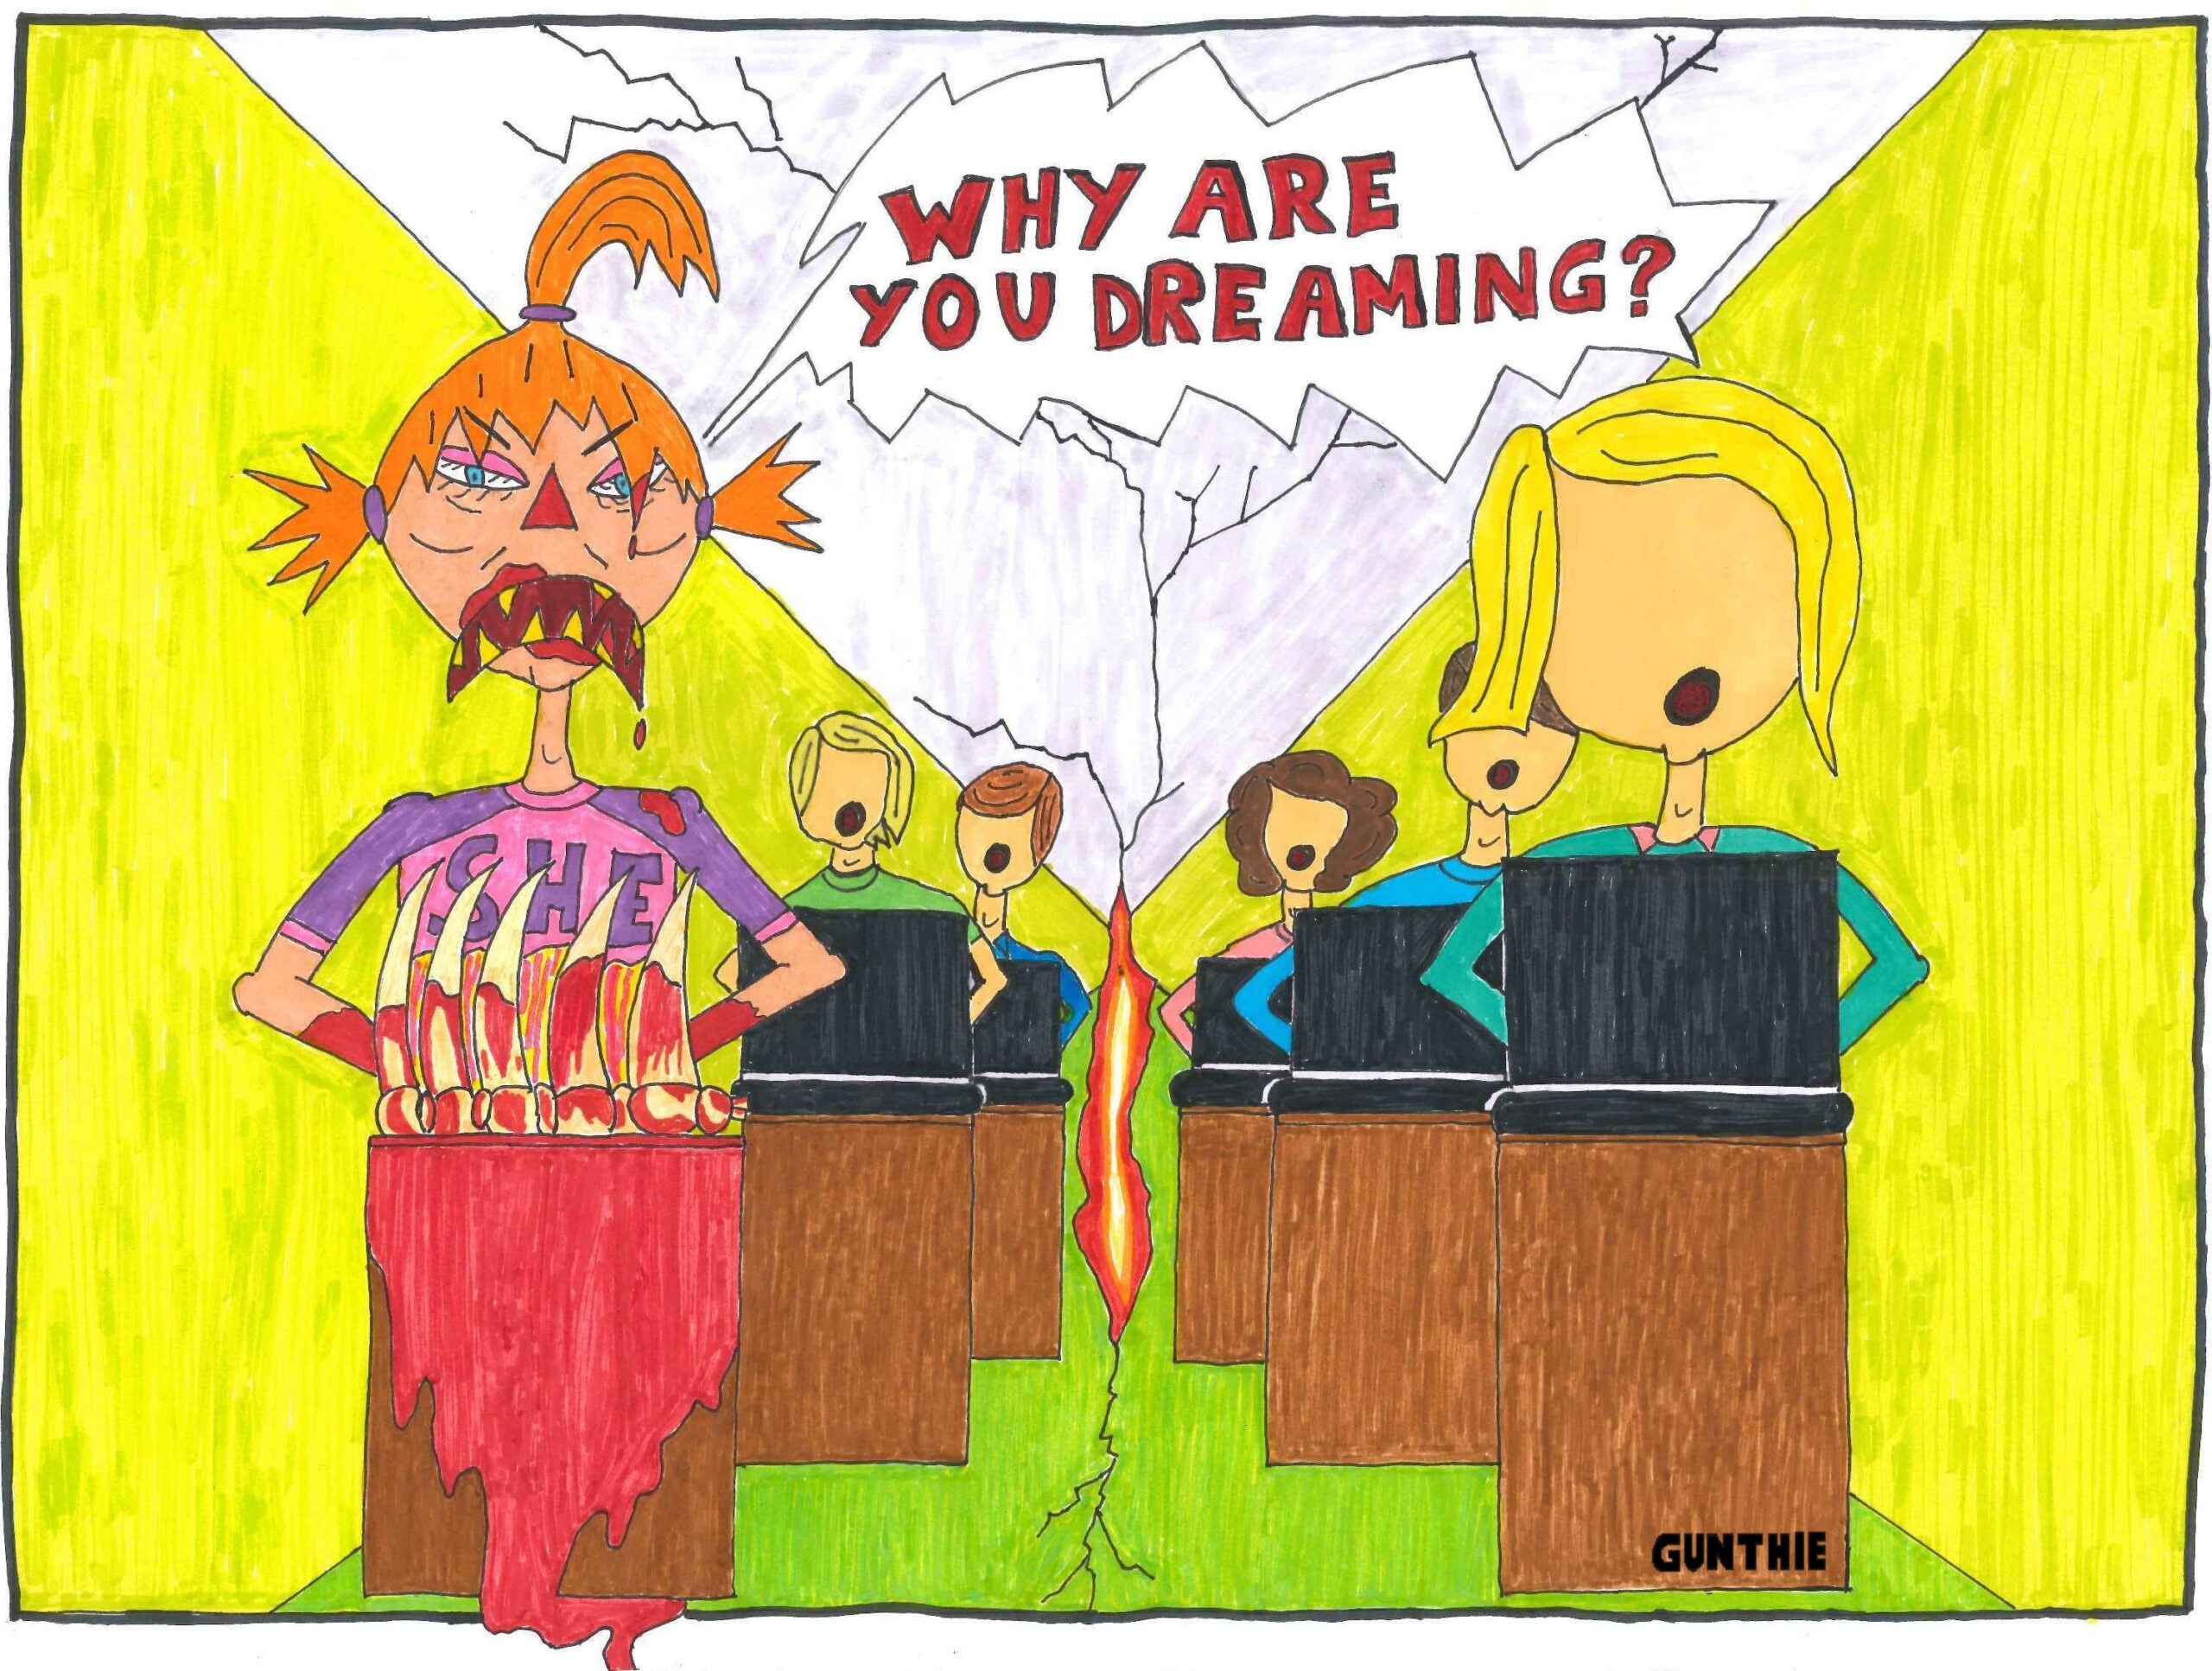 Why are you dreaming?